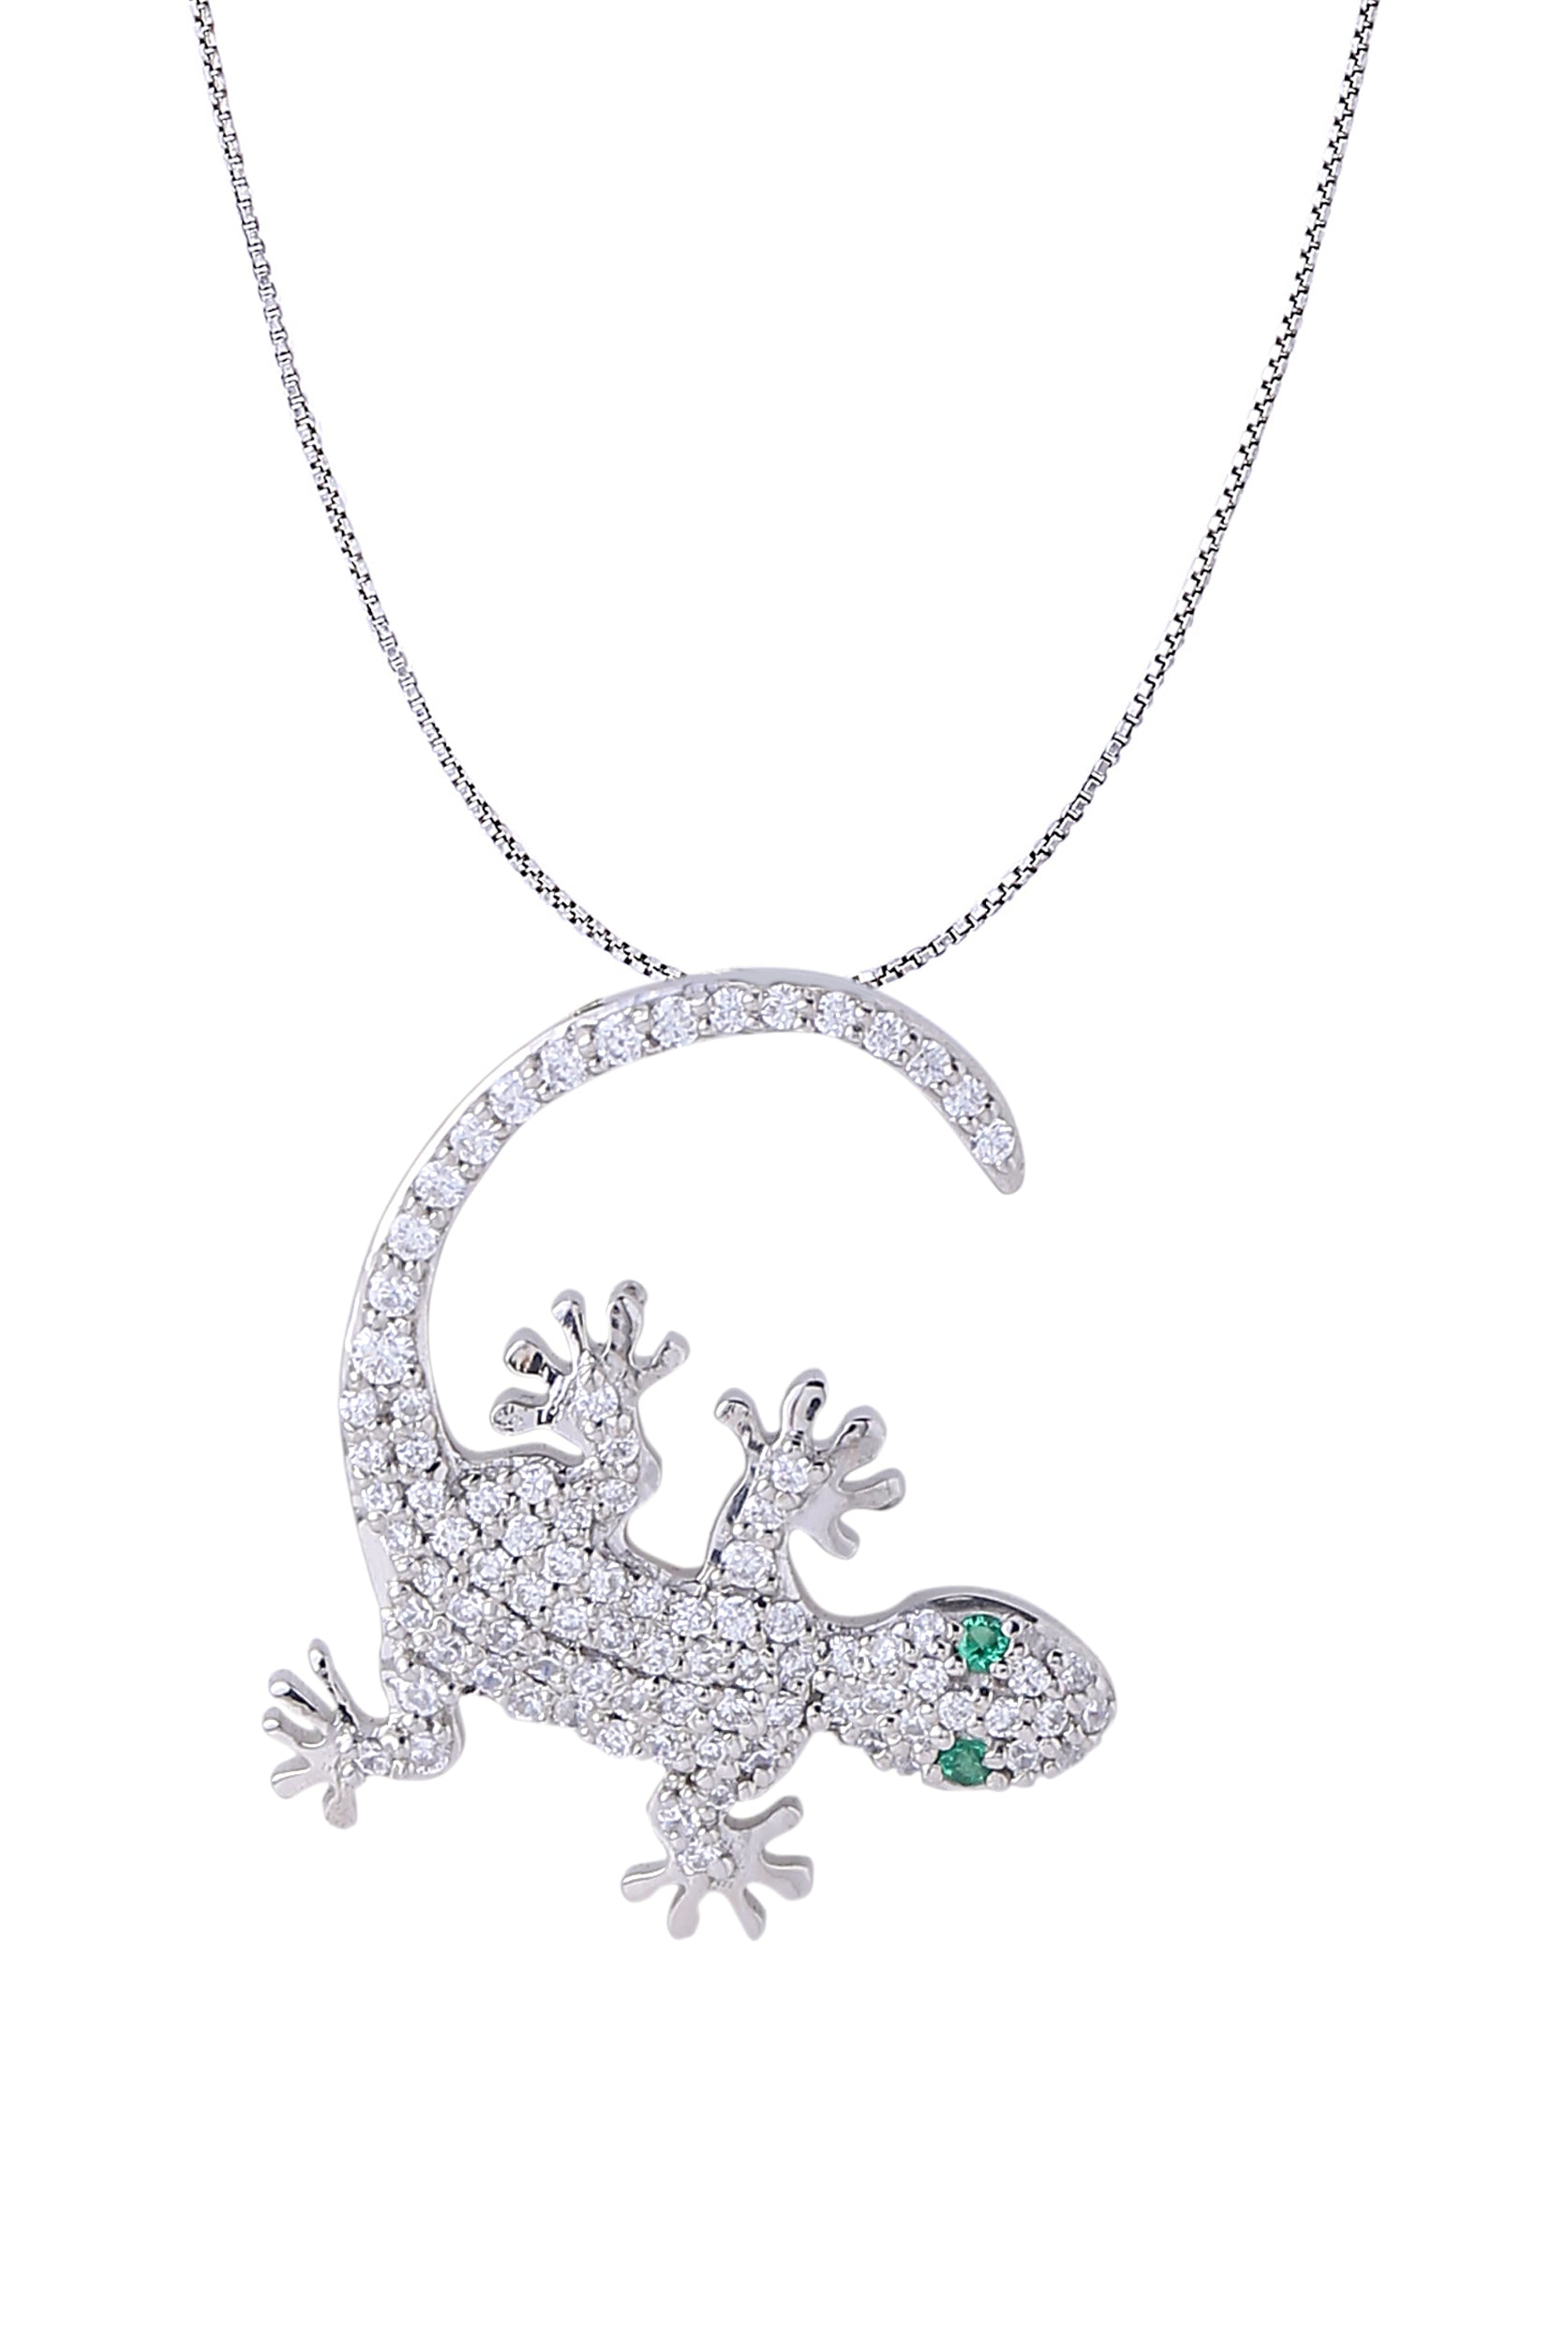 White Gold Color Lizard Pendant Made of 925 Sterling Silver Material with 20 Inch Long Silver Chain